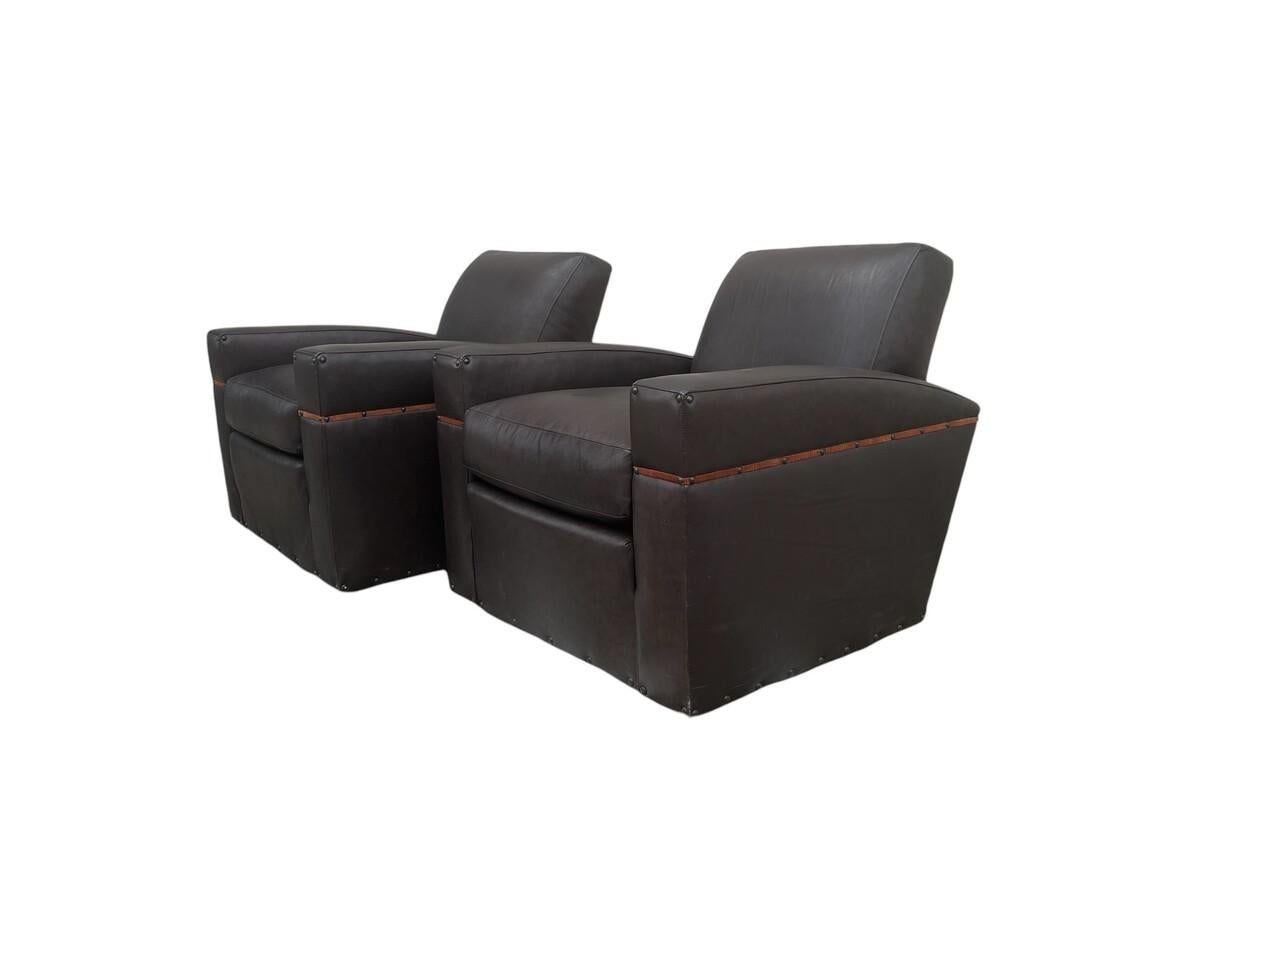 Indulge in timeless elegance with this pair of exceptional Classic style lounge chairs by Whittemore Sherrill. Crafted from 100% top grain artisan leather, each chair boasts hand burnished detailing for a luxurious finish. The exquisite nailhead